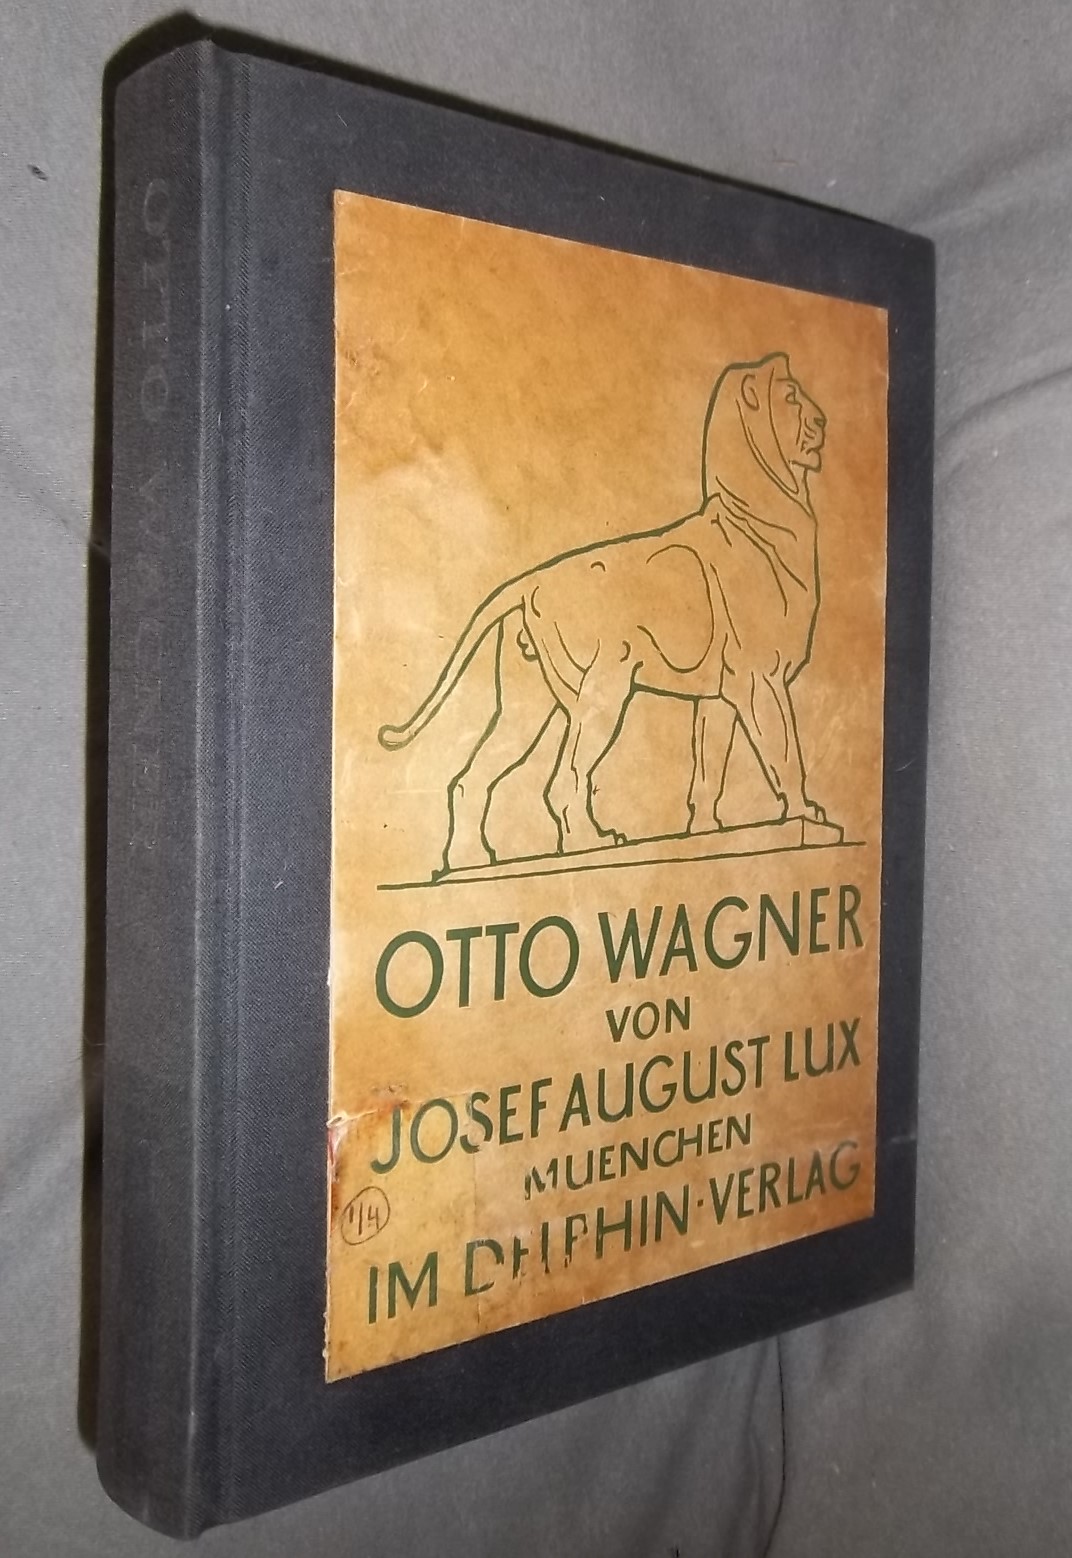 Wagner, Otto - Lux, Joseph August